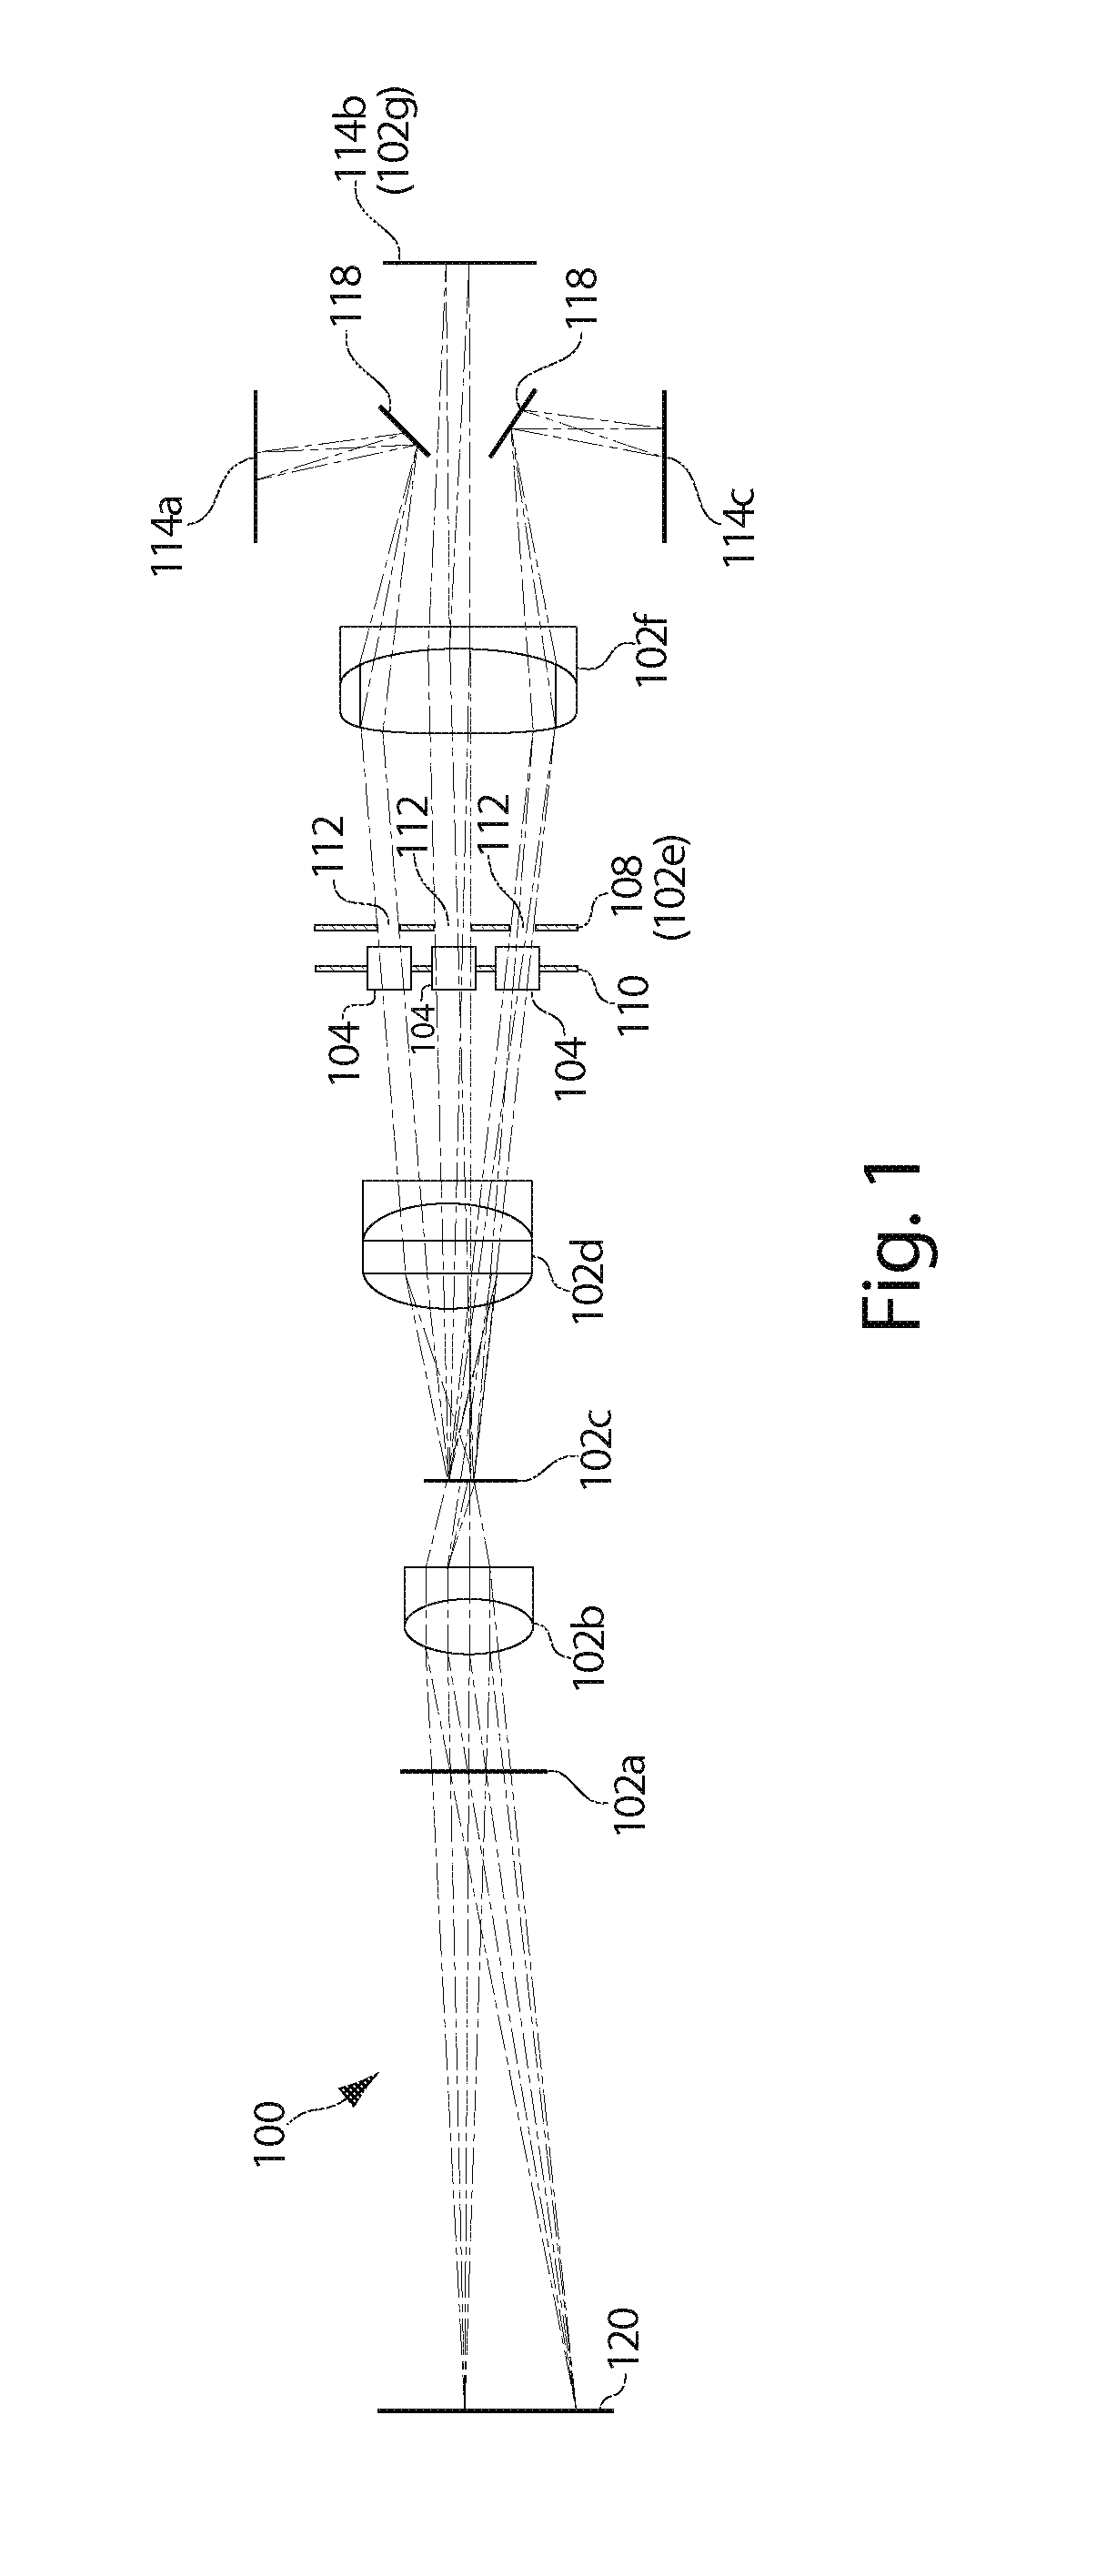 Three-channel camera systems with non-collinear apertures